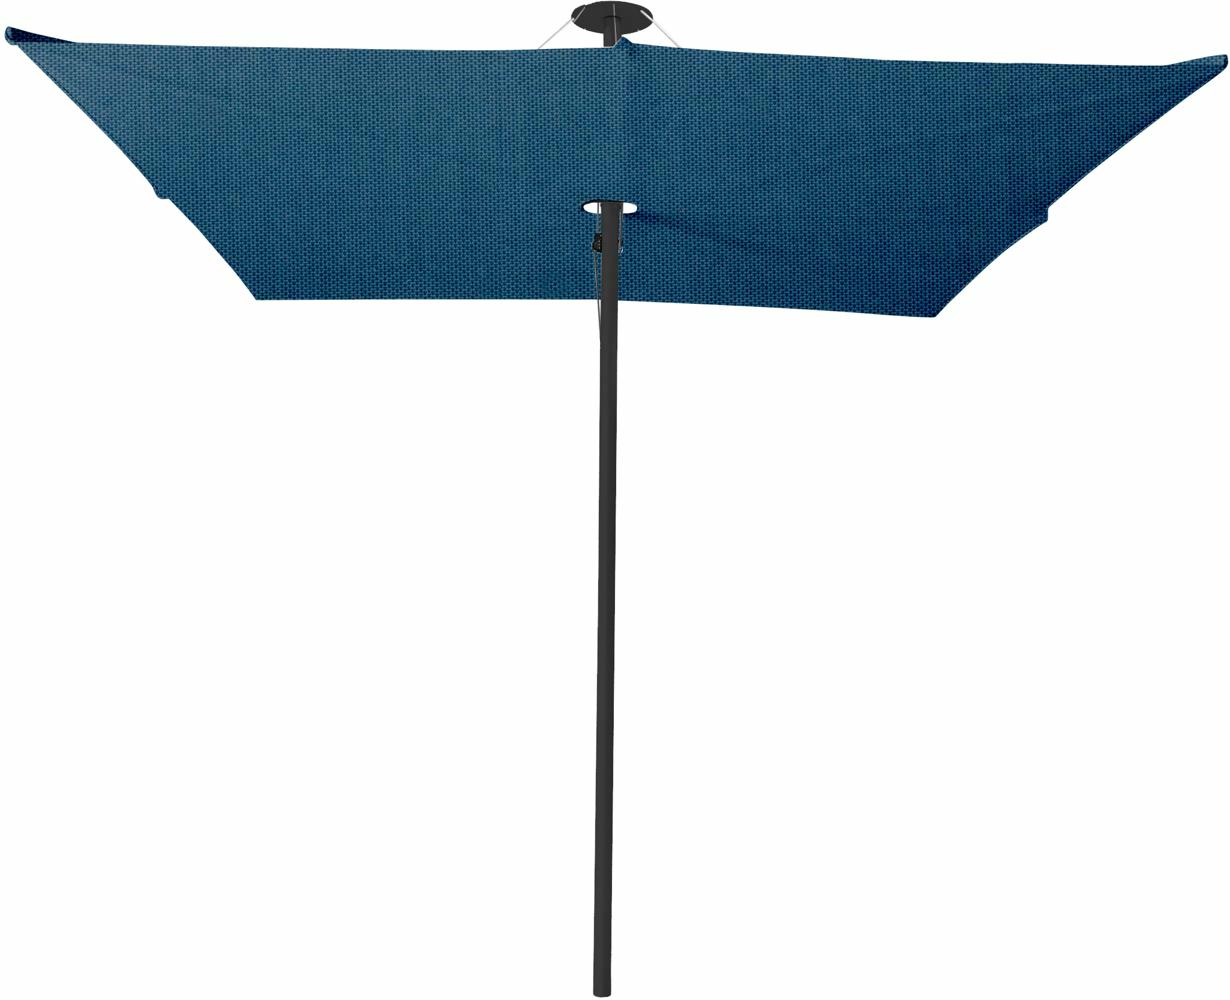 Infina center post umbrella, 2,5 m square, with frame in Dusk and Solidum BlueStorm canopy.